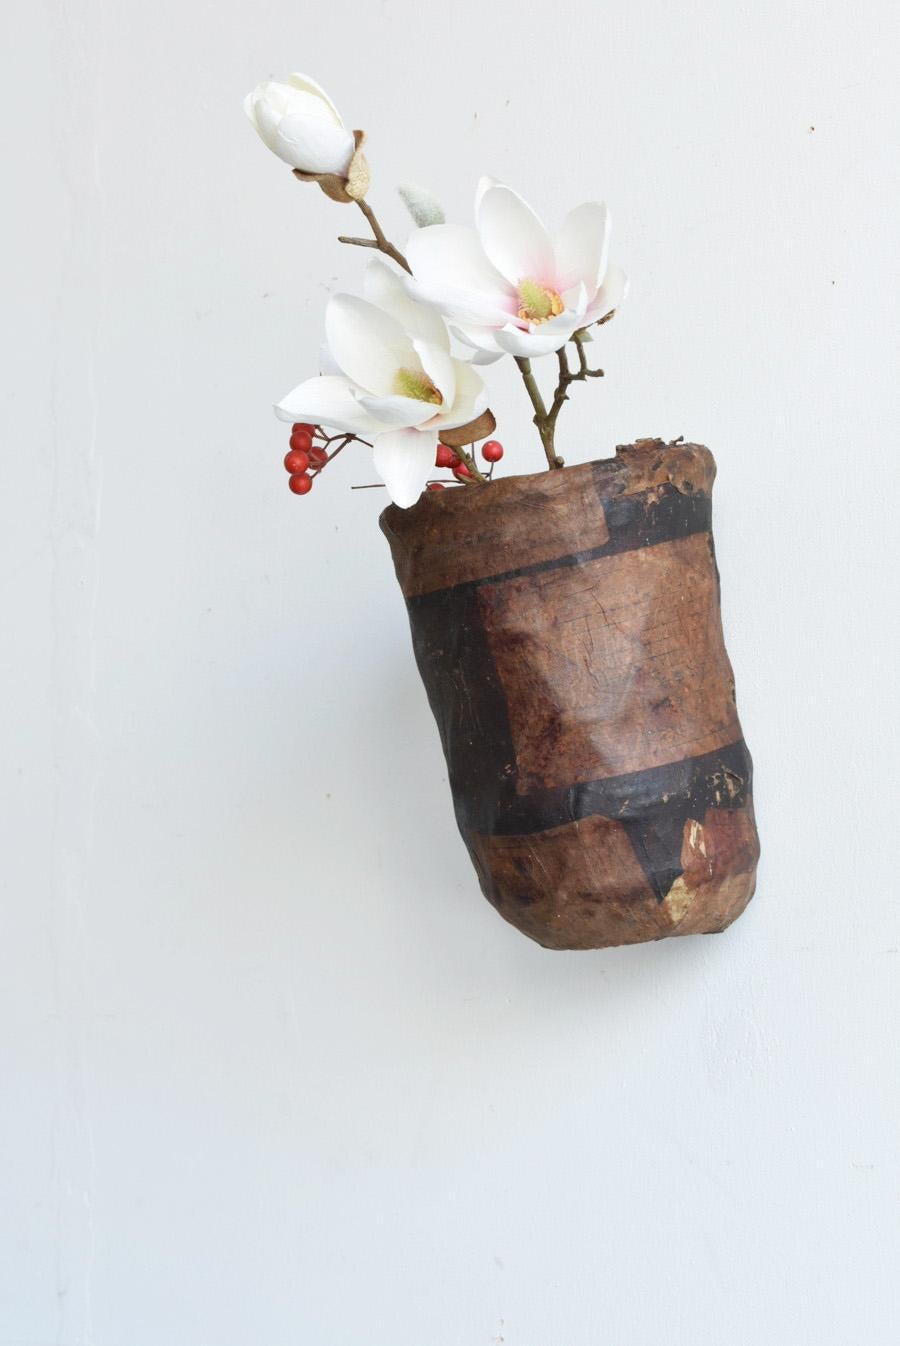 Japanese Antique Flower Vase with Paper Pasted on It./1868-1920/Wabi-Sabi Object 13